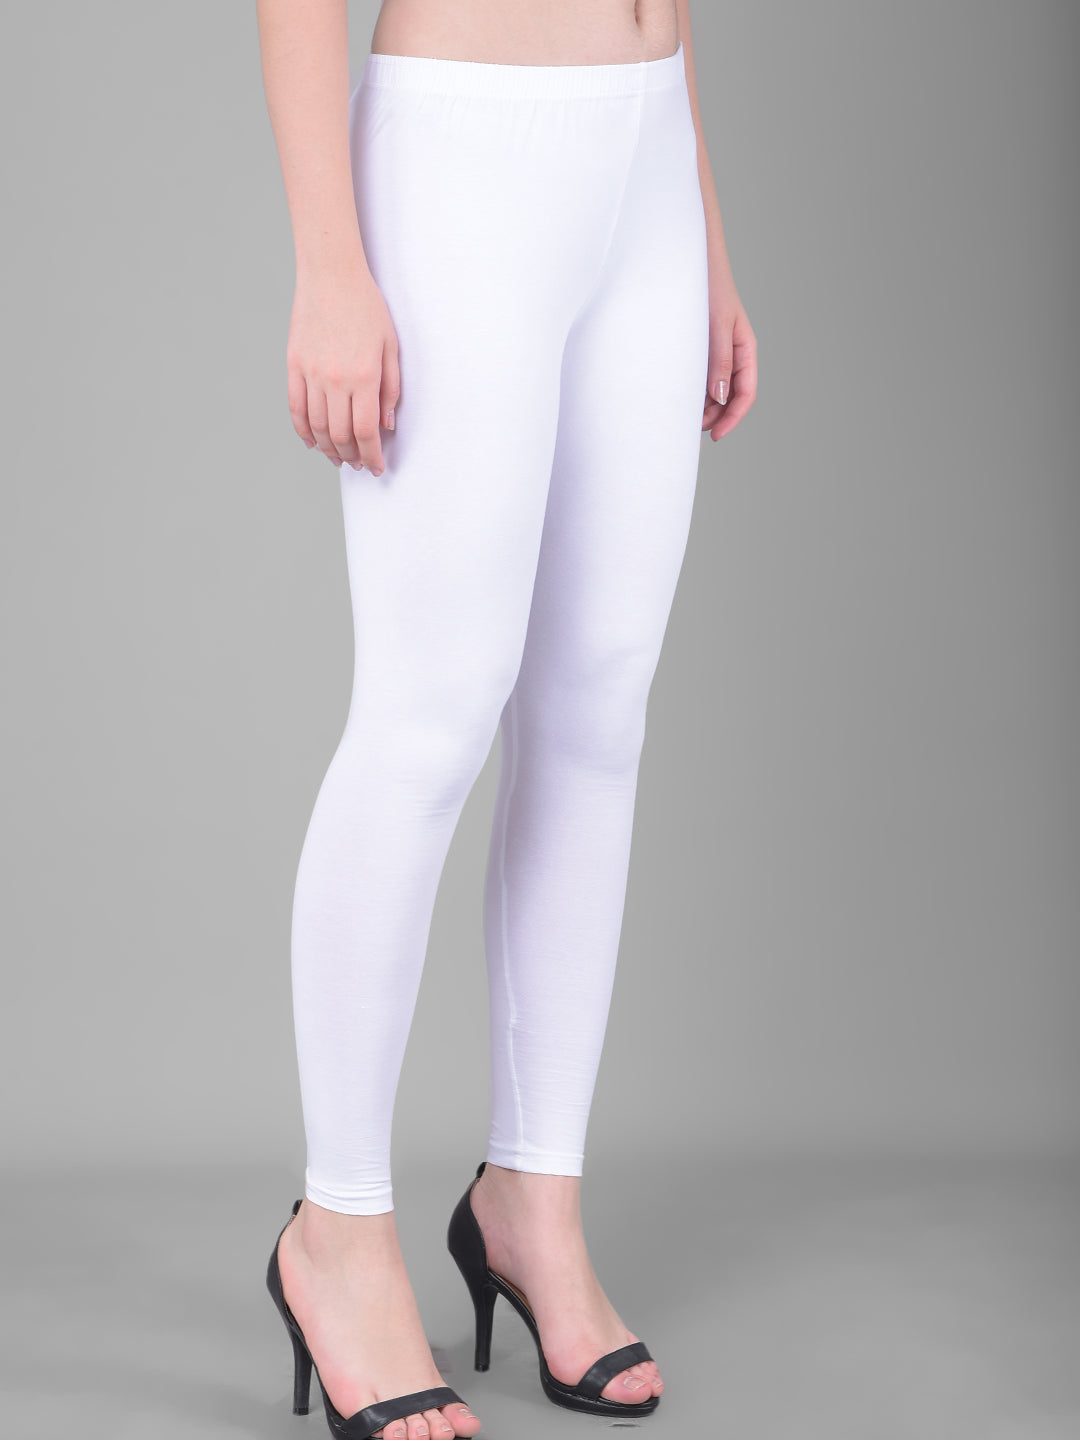 Comfort Lady Legging Price Starting From Rs 353. Find Verified